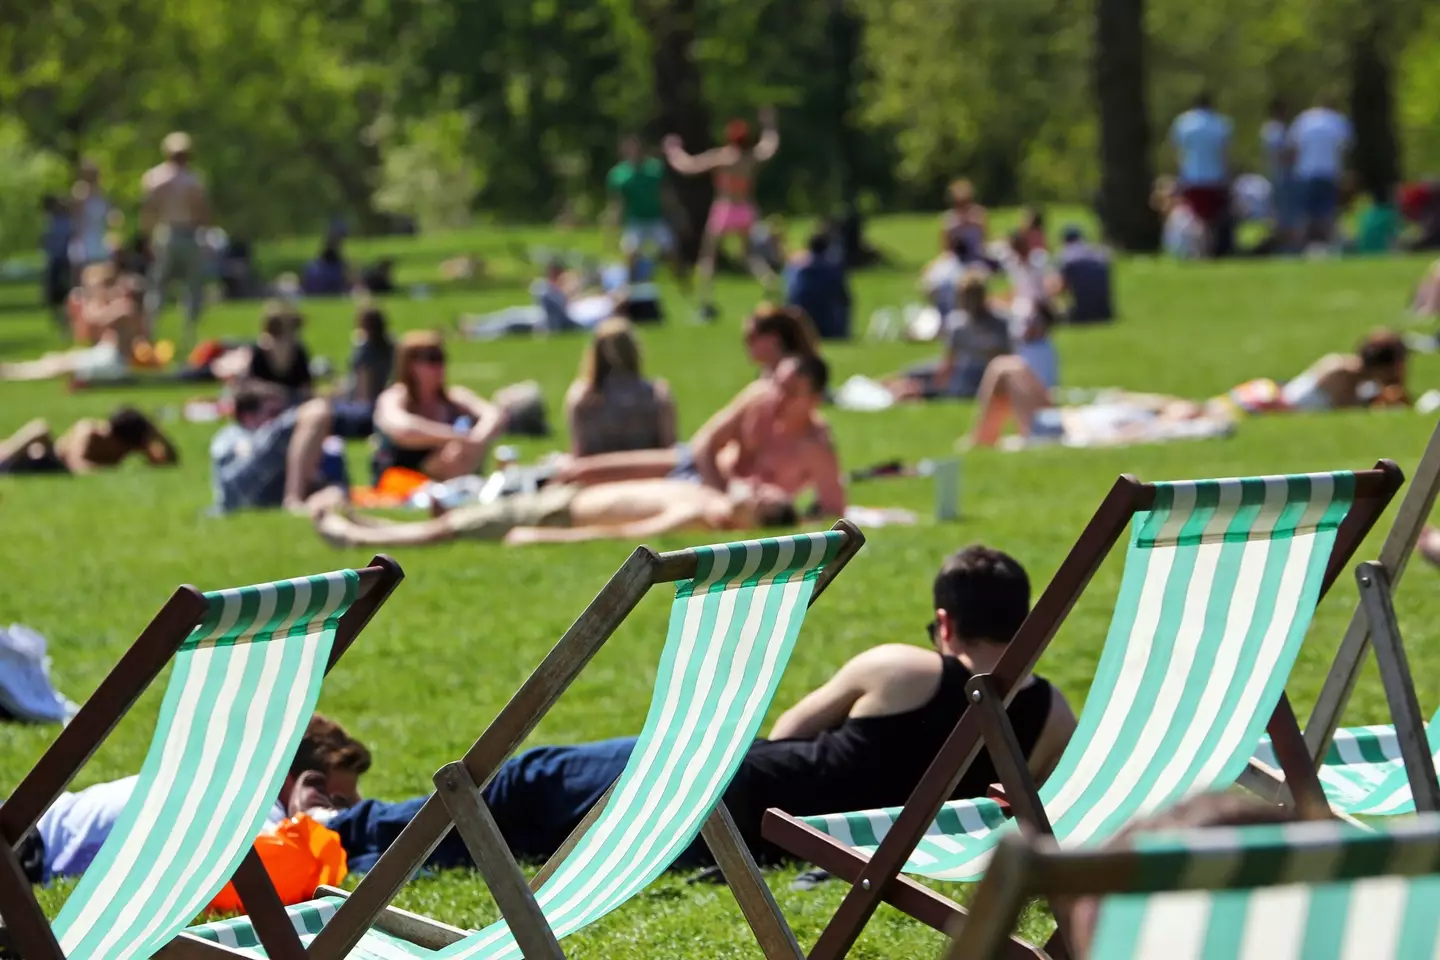 According to the Met Office, London will see highs of 32C on Friday.